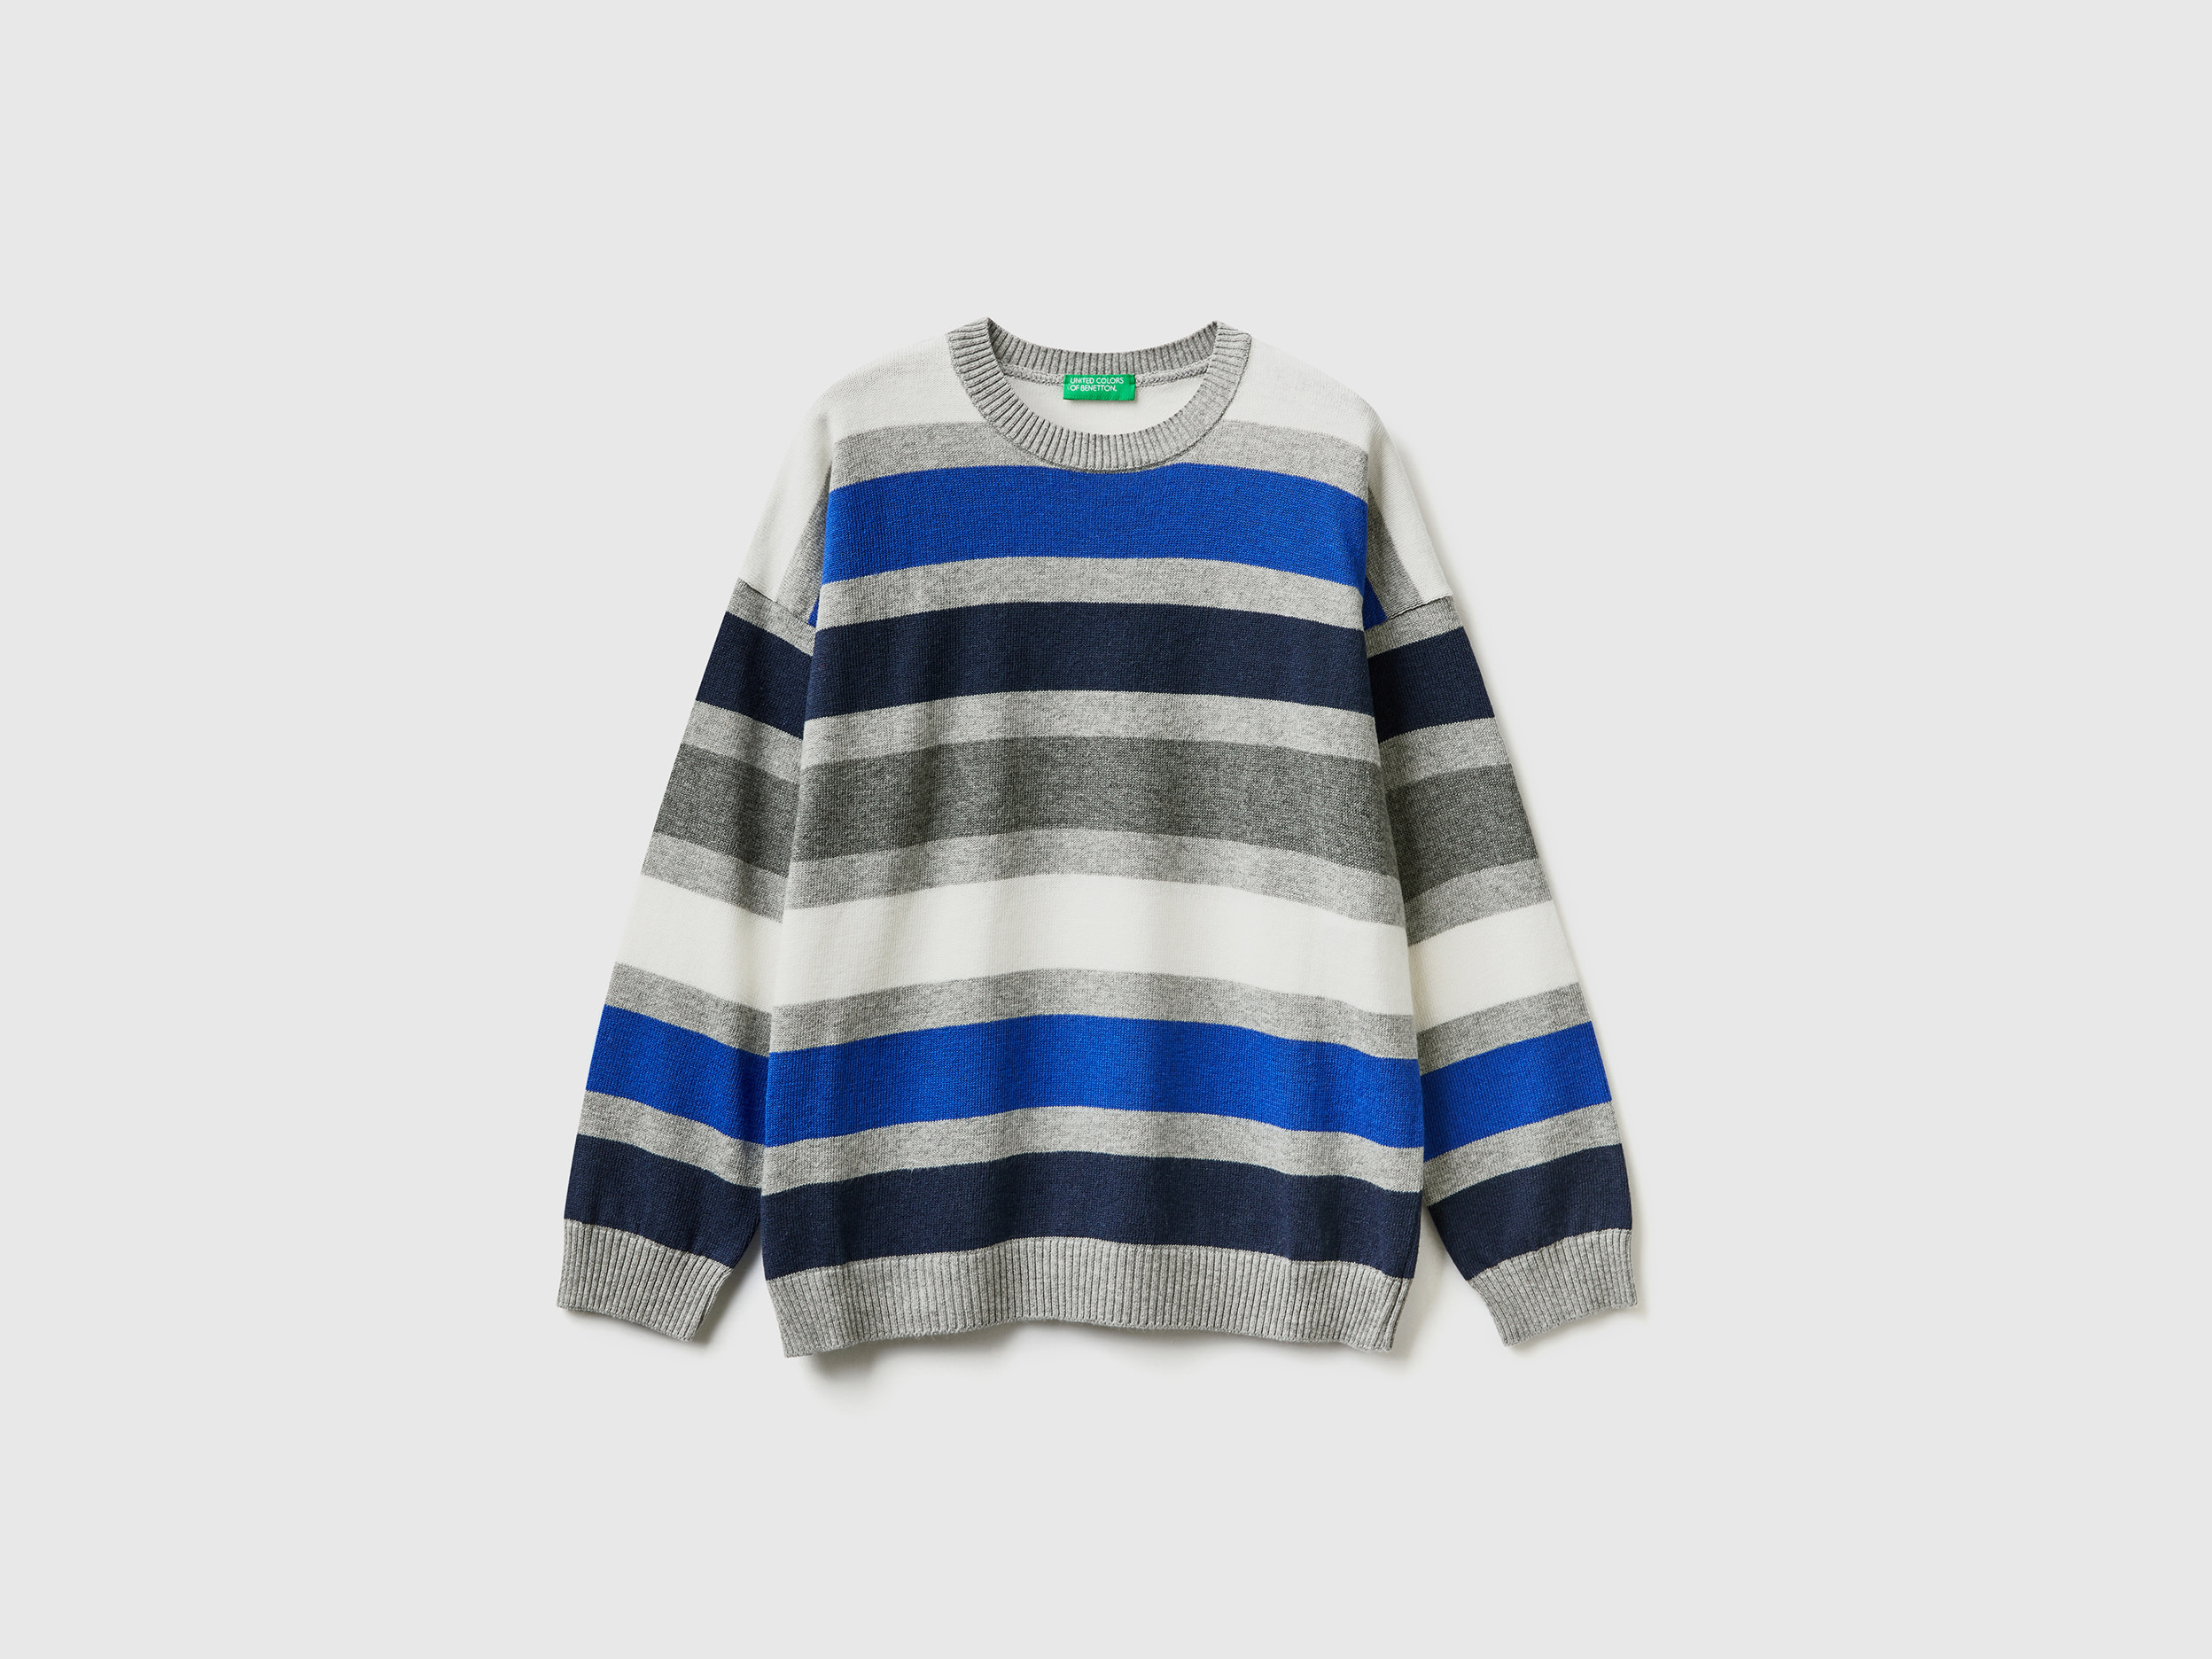 Benetton, Striped Sweater In Wool And Cotton Blend, size 2XL, Light Gray, Kids